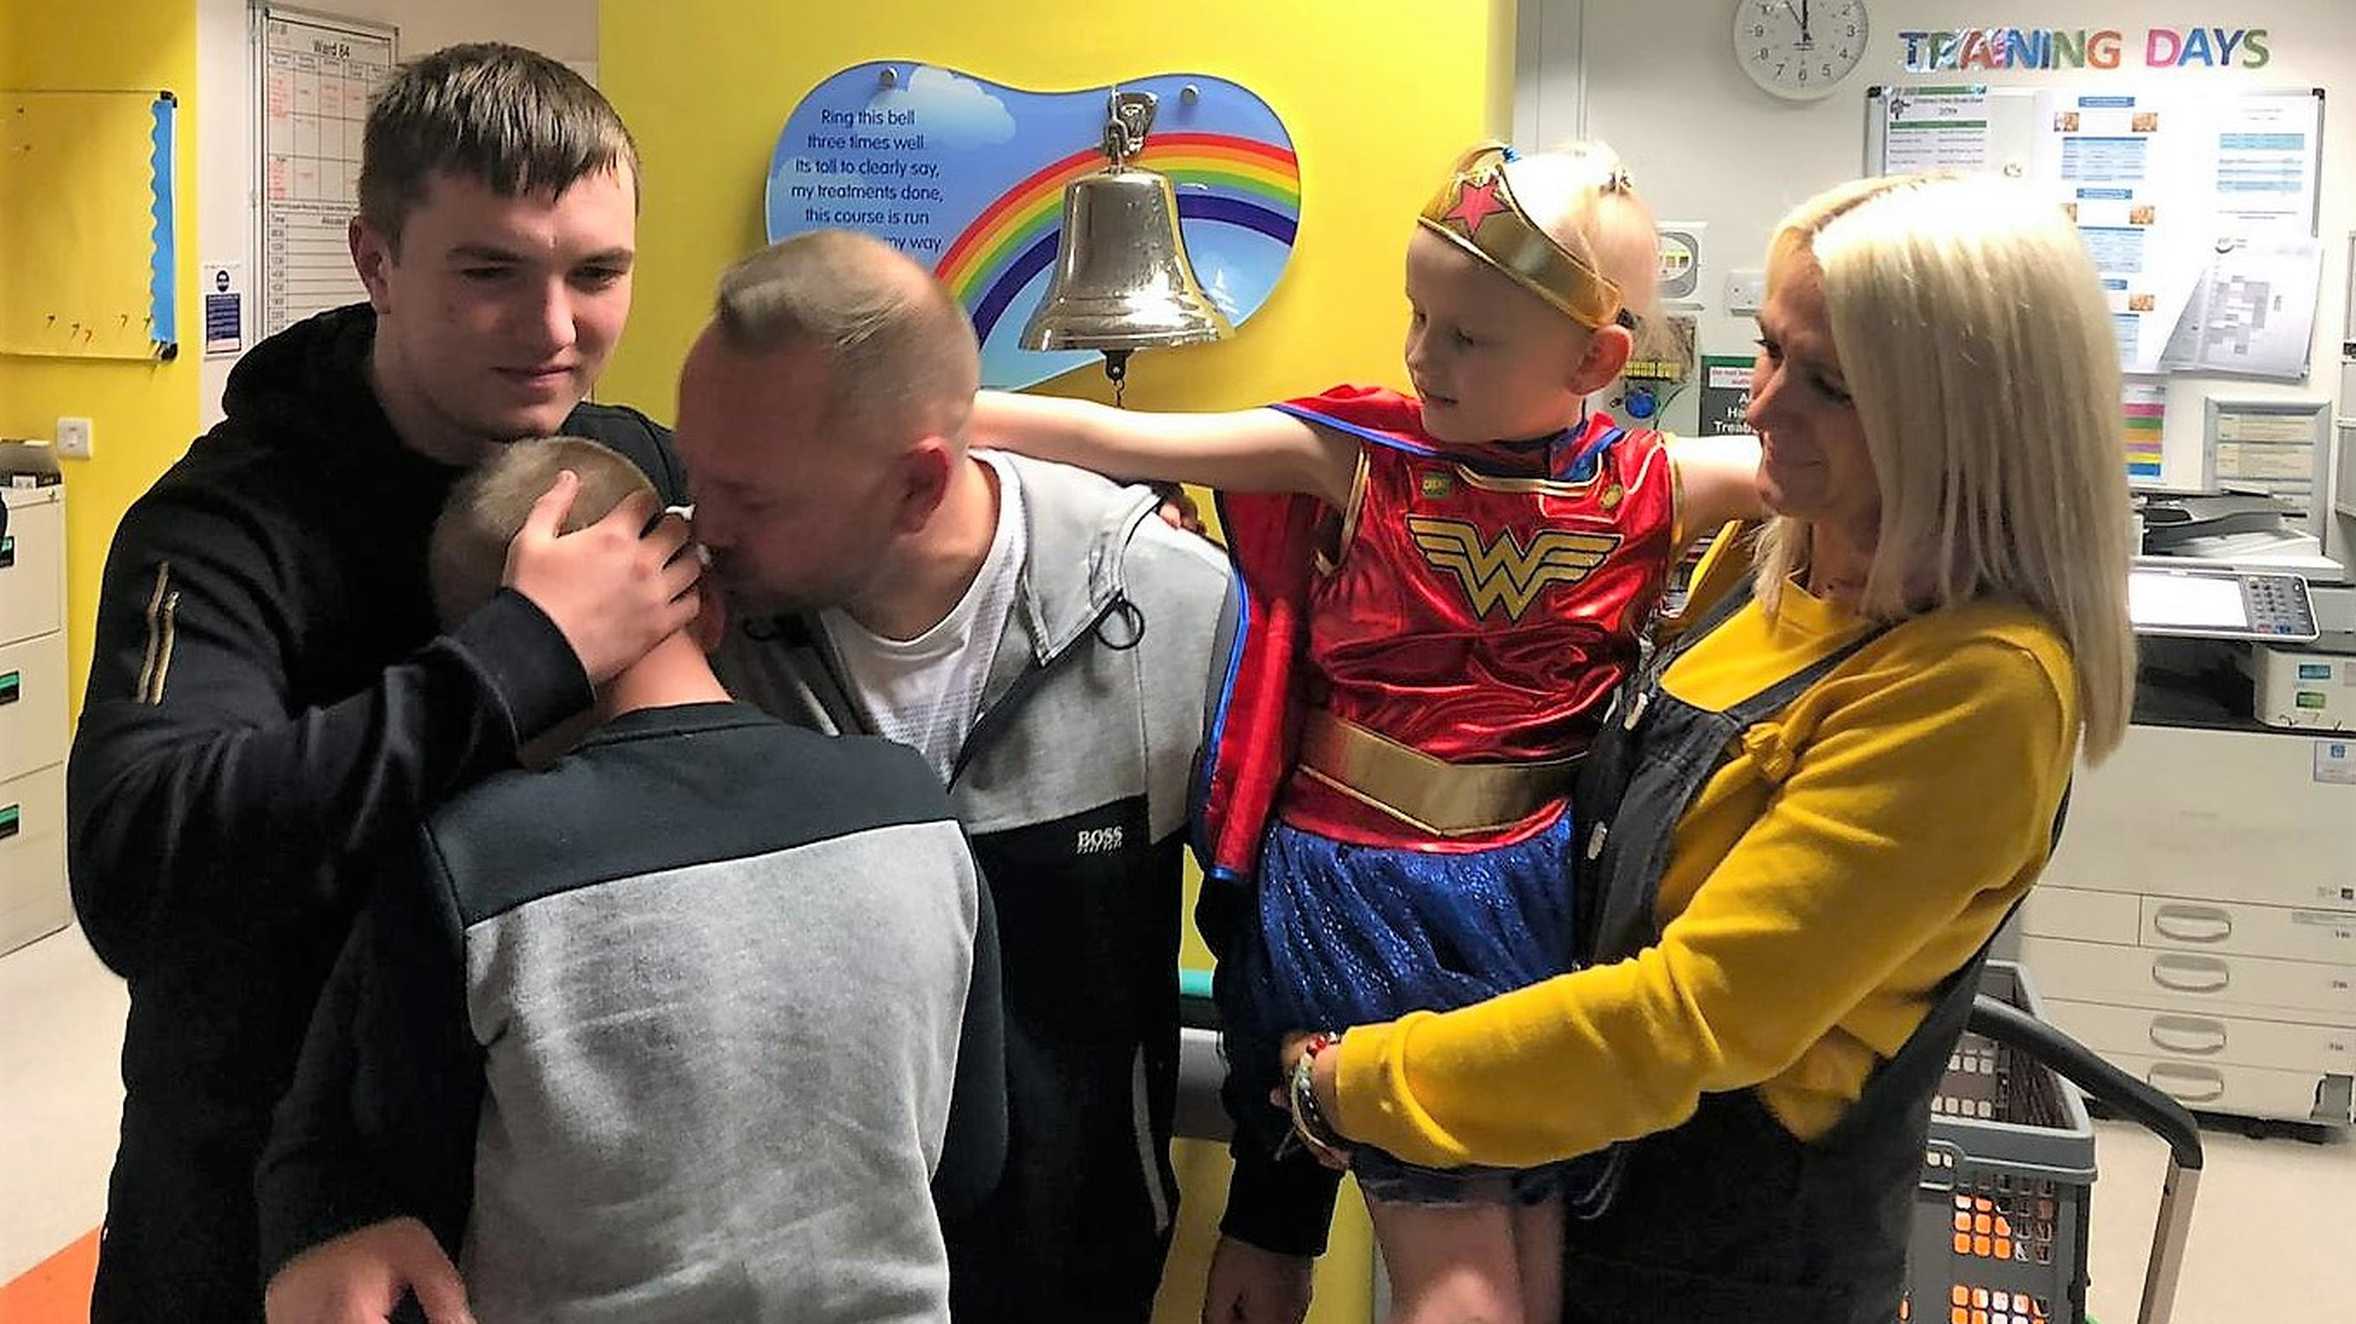 Isla and her family ringing the end of treatment bell.